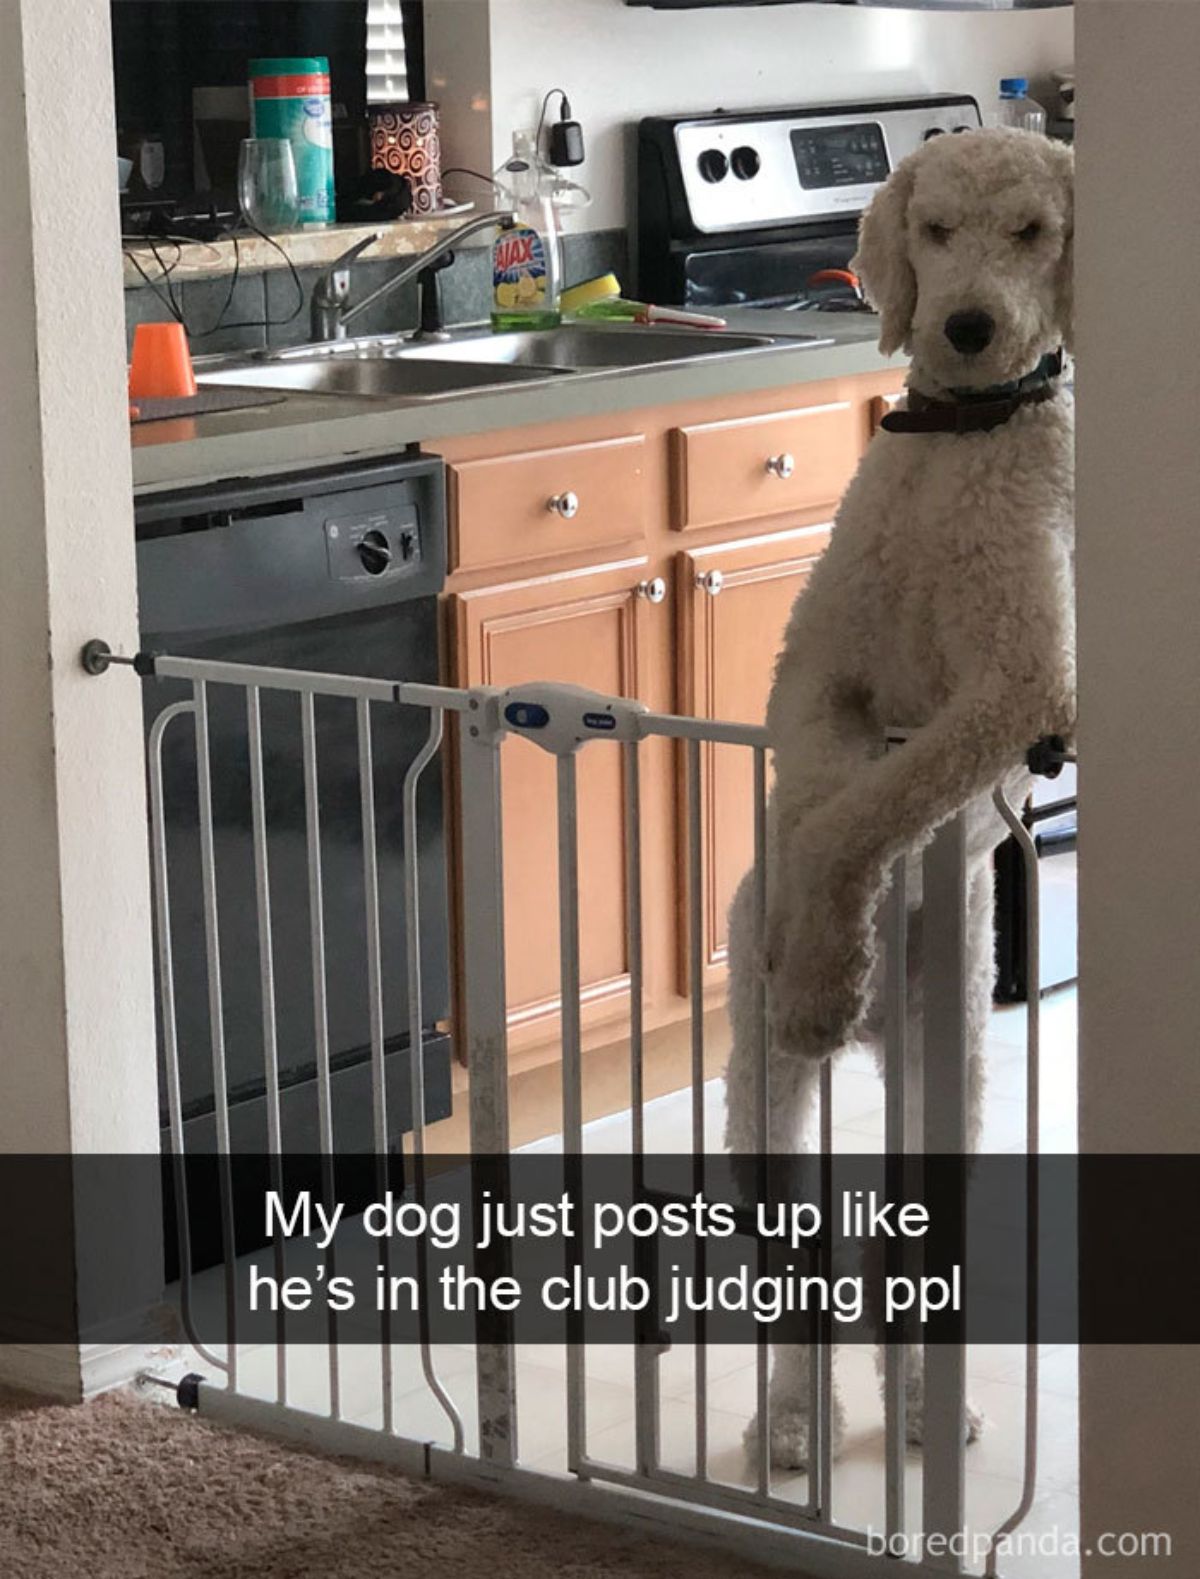 white poodle standing at a baby gate with one front leg resting over it with a caption saying my dog just posts up like he's in the club judging ppl